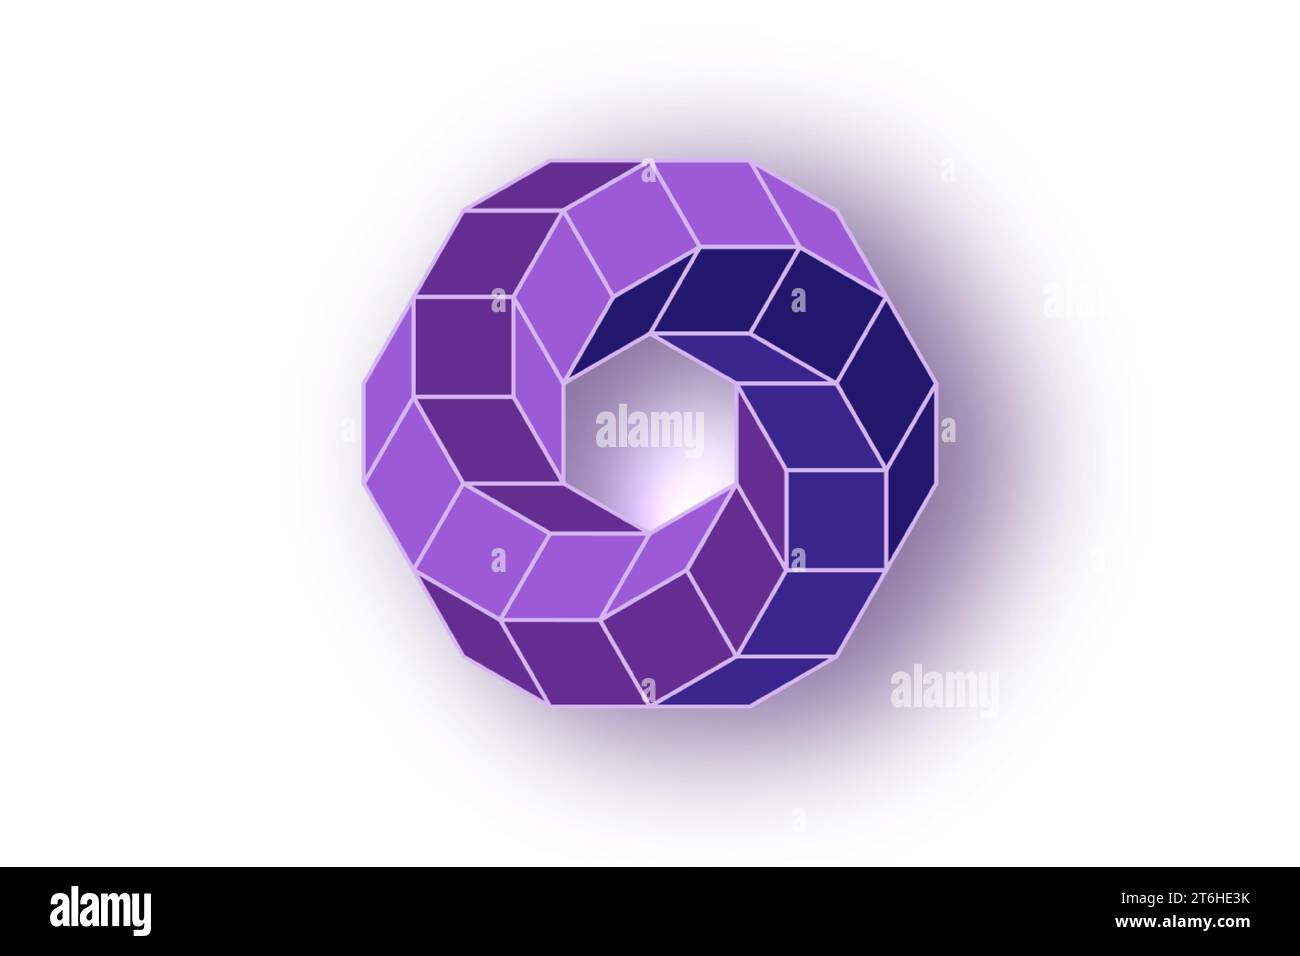 3D spiral rhomboid Shape in purple color, logo design in geometric frame style. Business abstract icon. Corporate, media, technology, vector isolated Stock Vector